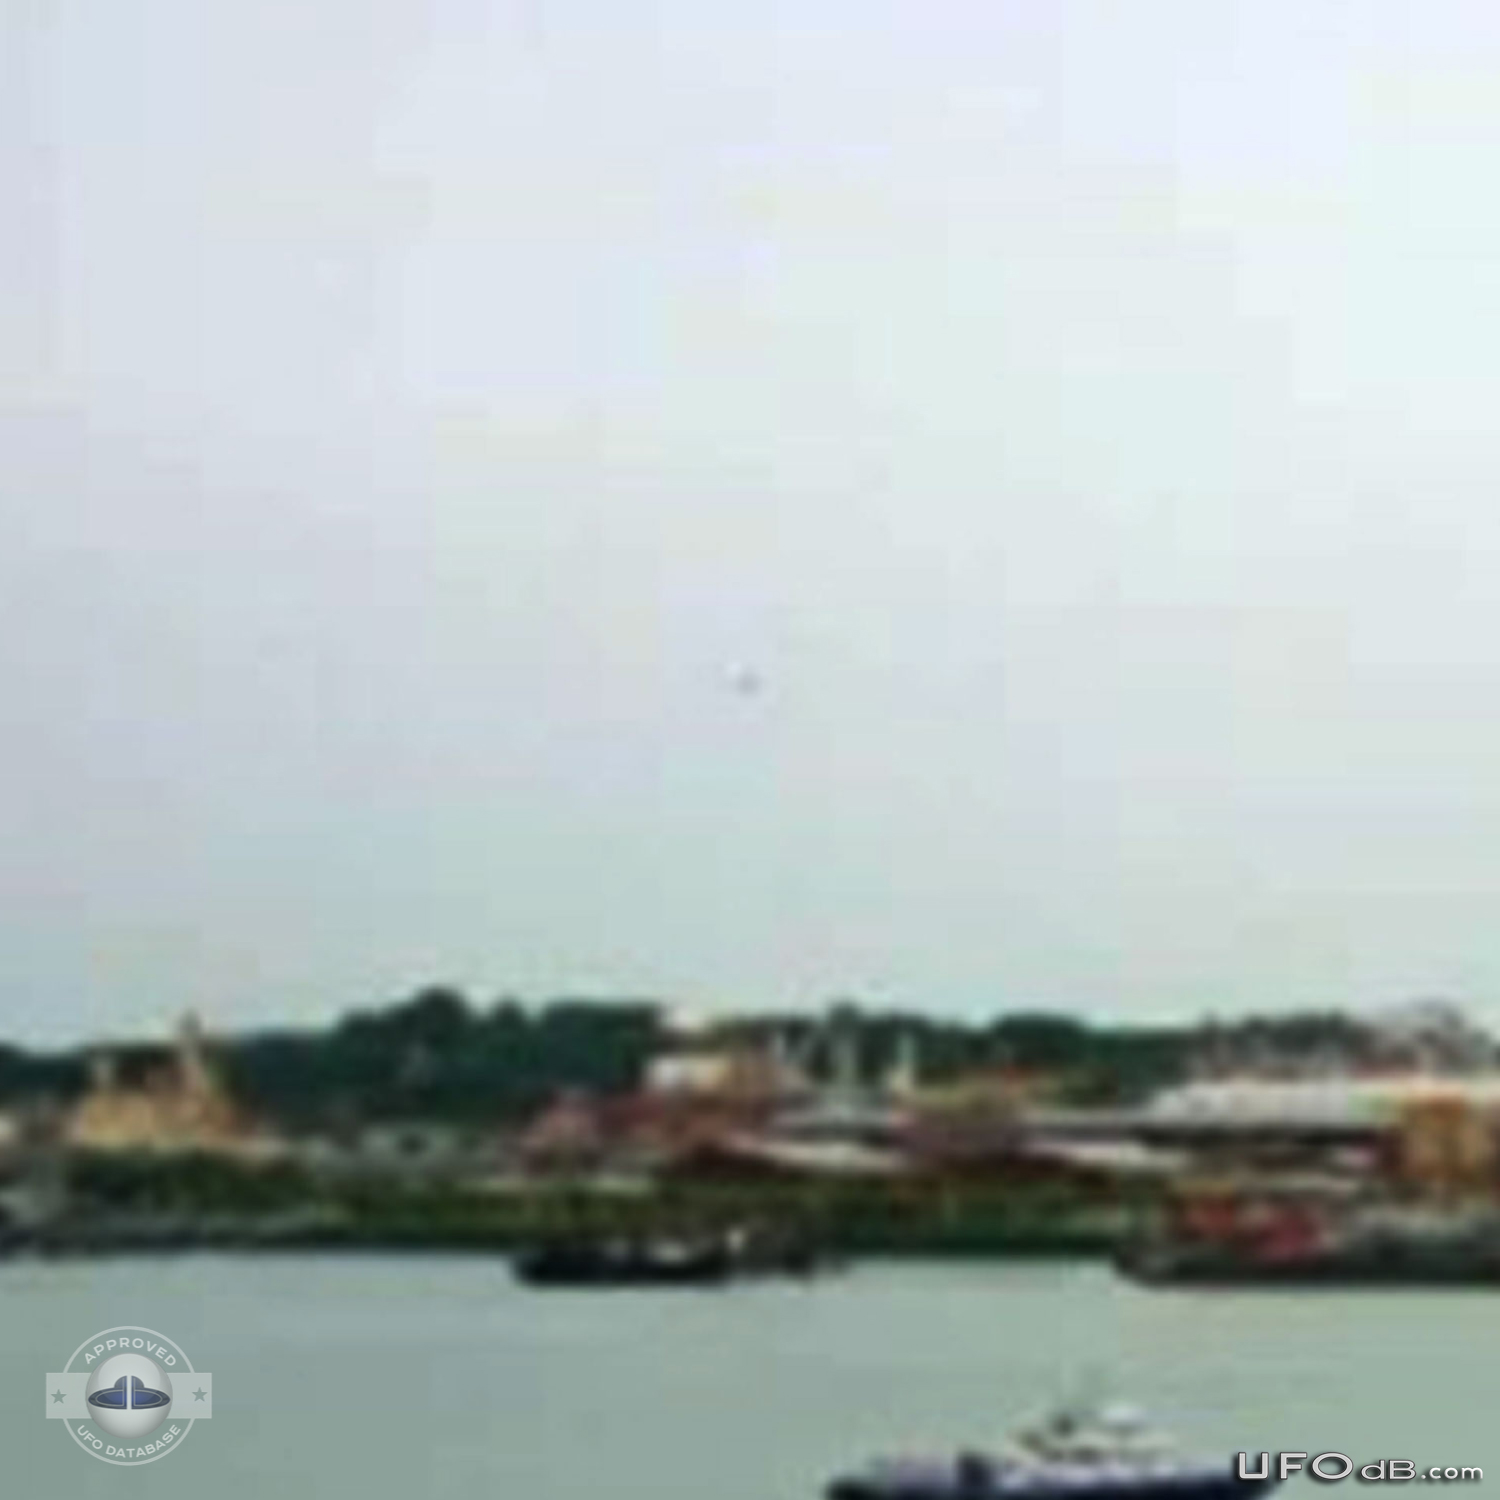 UFO caught on picture near the Resort World Sentosa in Singapore 2010 UFO Picture #393-1